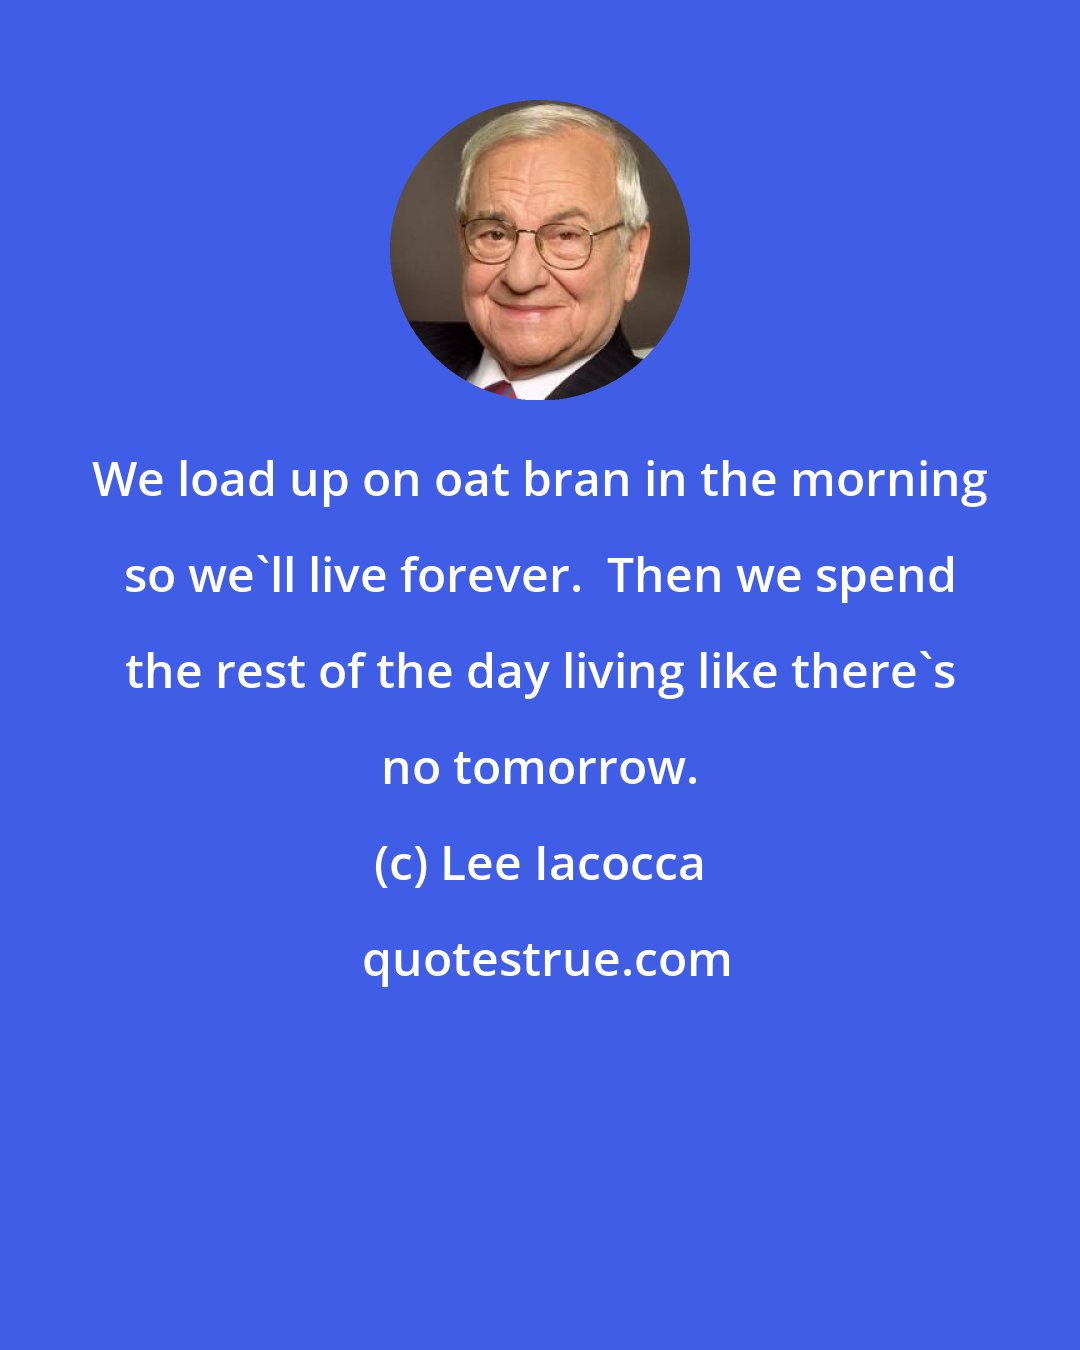 Lee Iacocca: We load up on oat bran in the morning so we'll live forever.  Then we spend the rest of the day living like there's no tomorrow.